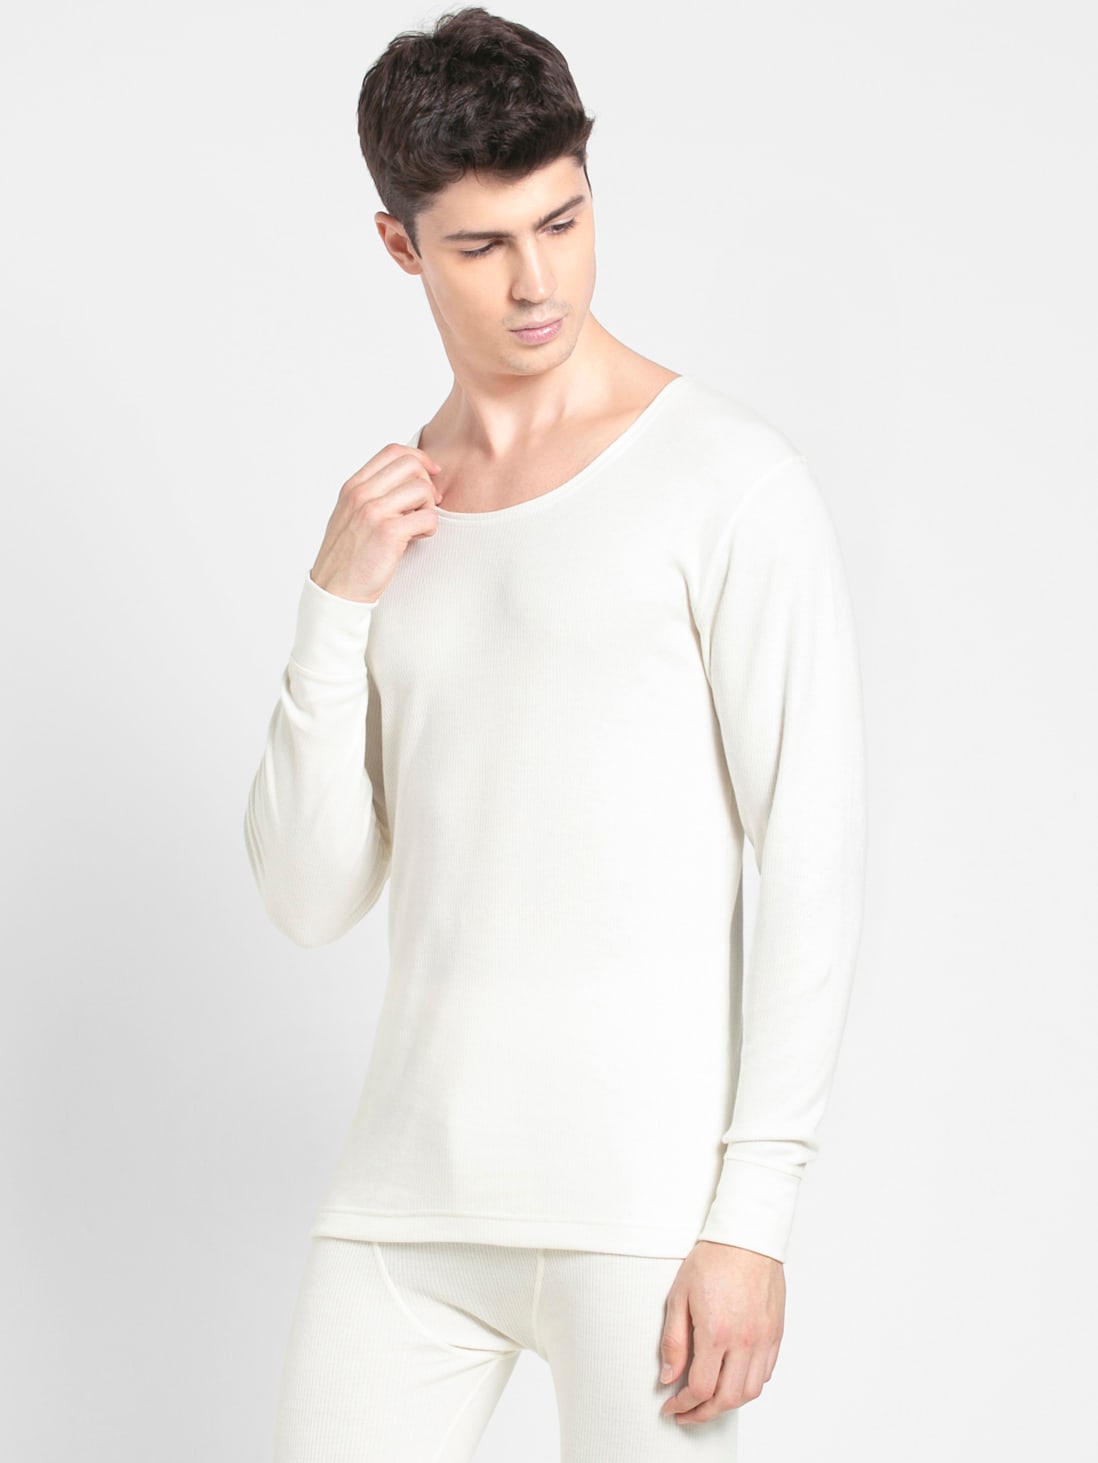 Hypoallergenic Men's Thermal Long Sleeve (Natural) – Cottonique -  Allergy-free Apparel